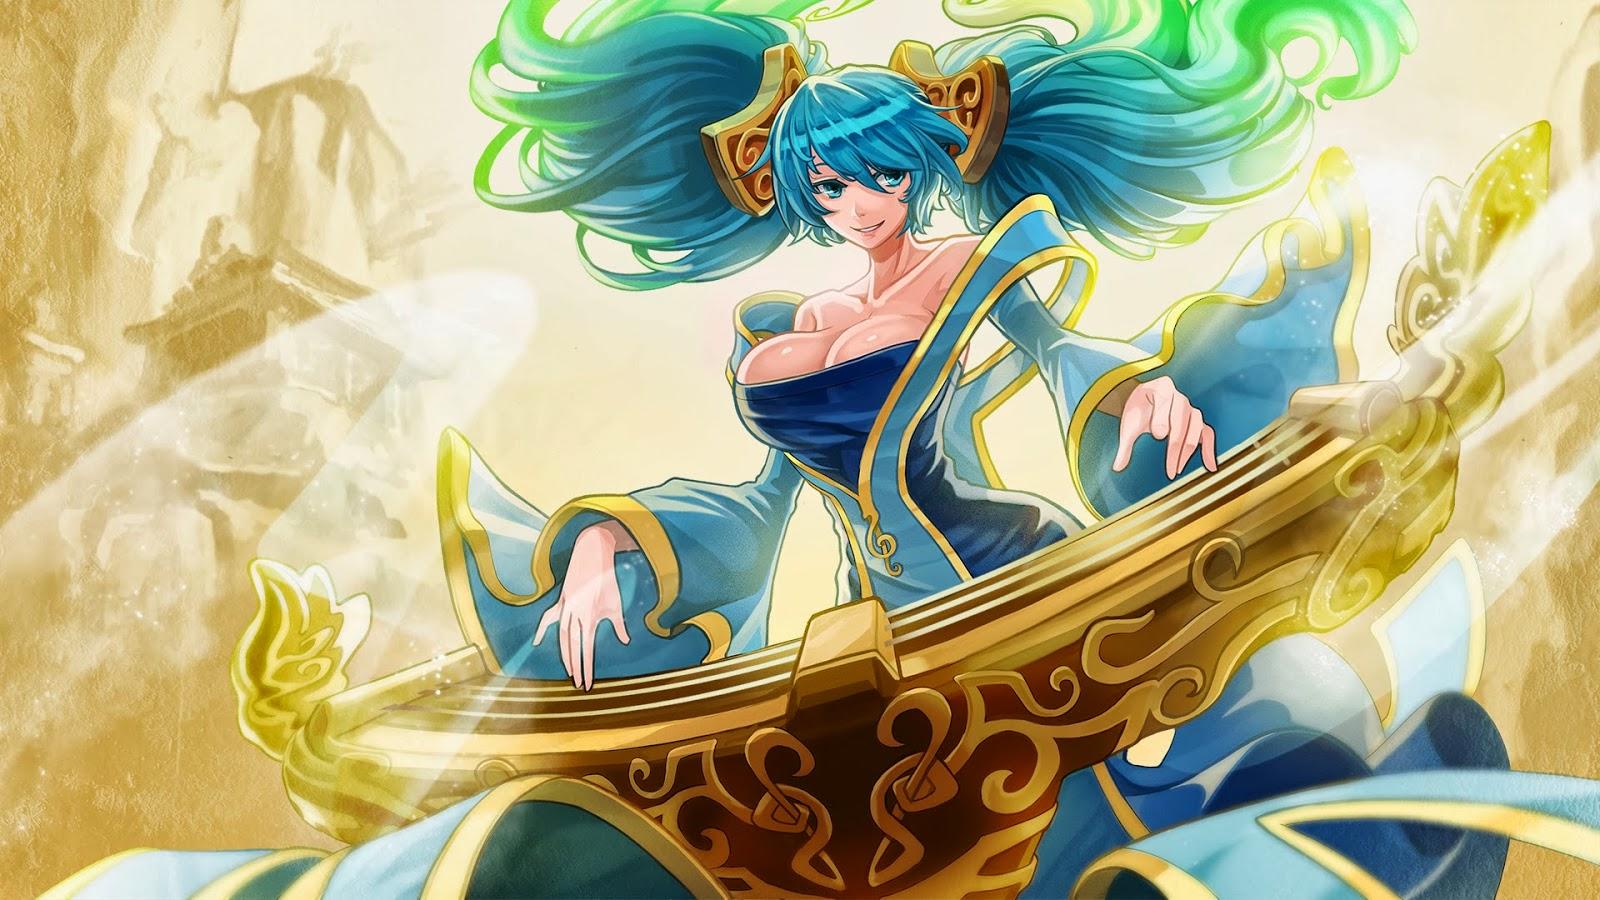 League Of Legends Wallpaper and Cover Photo BLÓG: Sona League of Legends Wallpaper, Sona Desktop Wallpaper